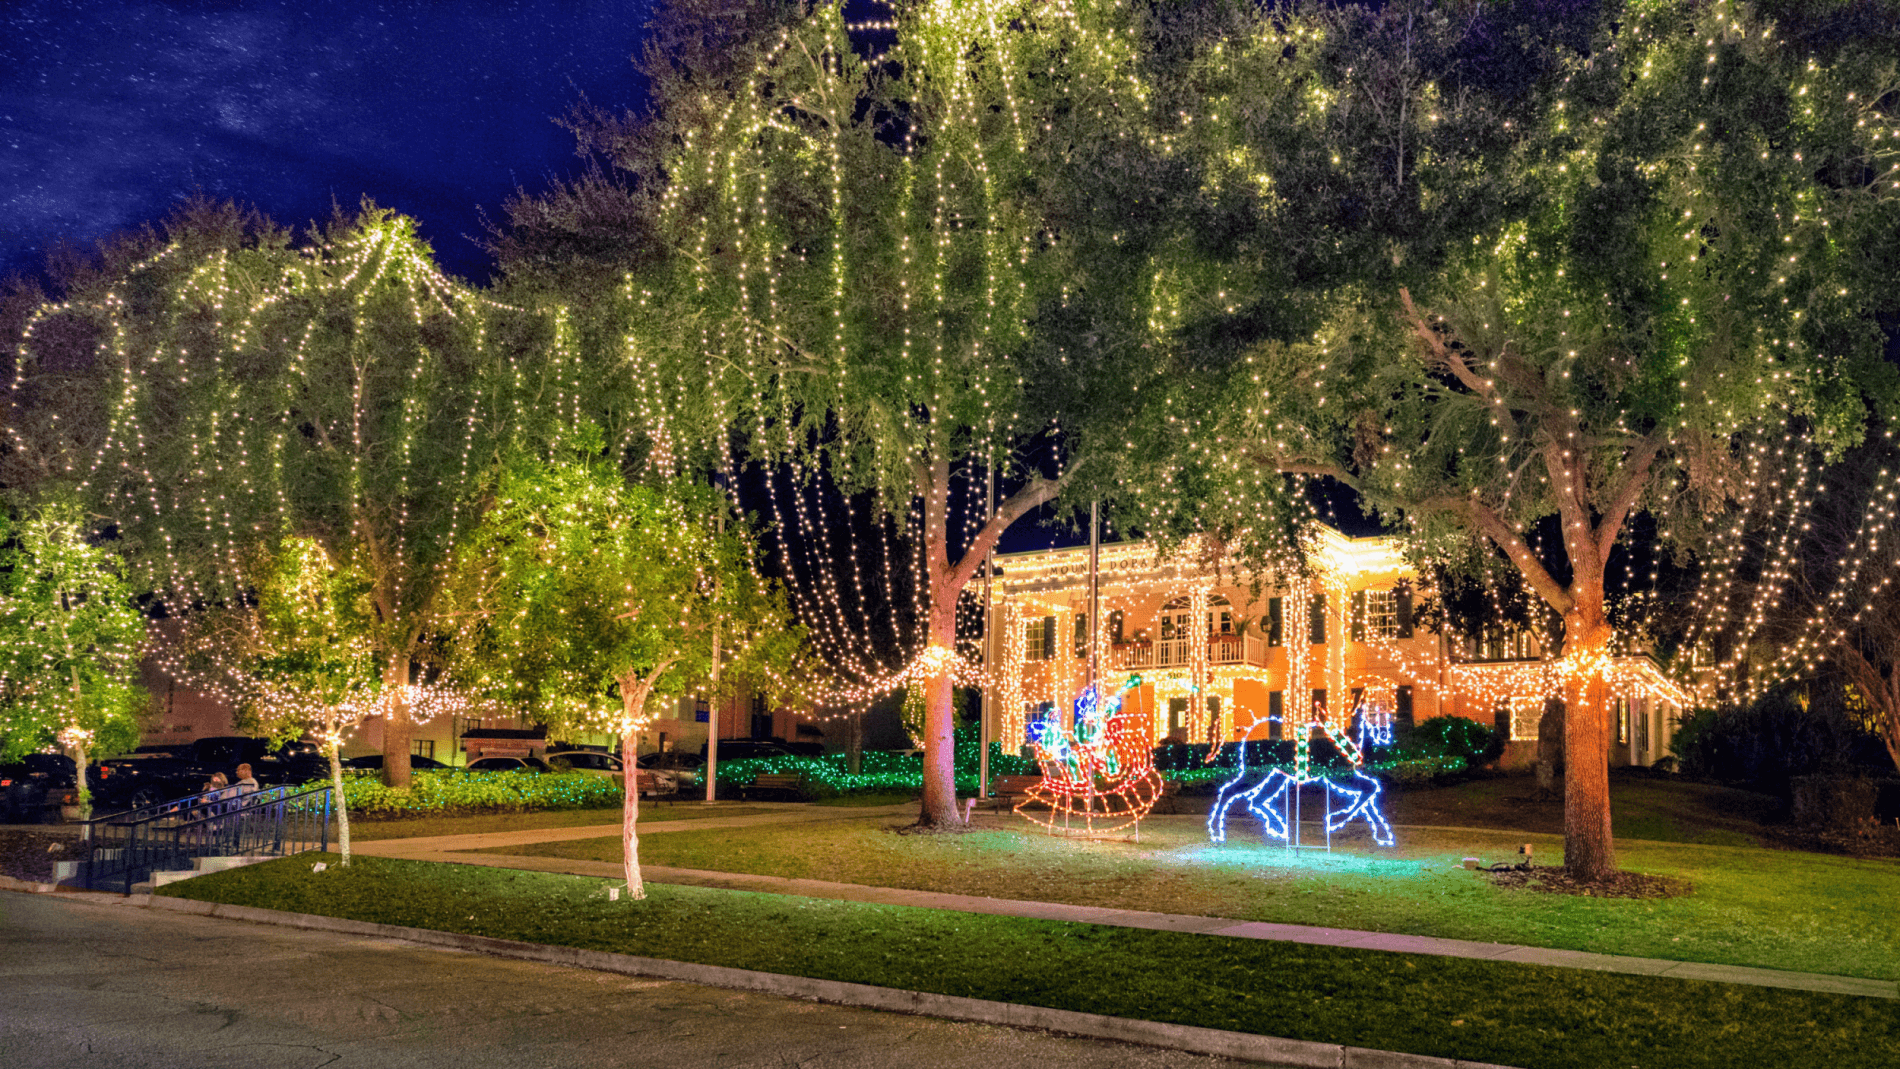 Mount Dora City Hall and landscaping with chrismtas lights on them